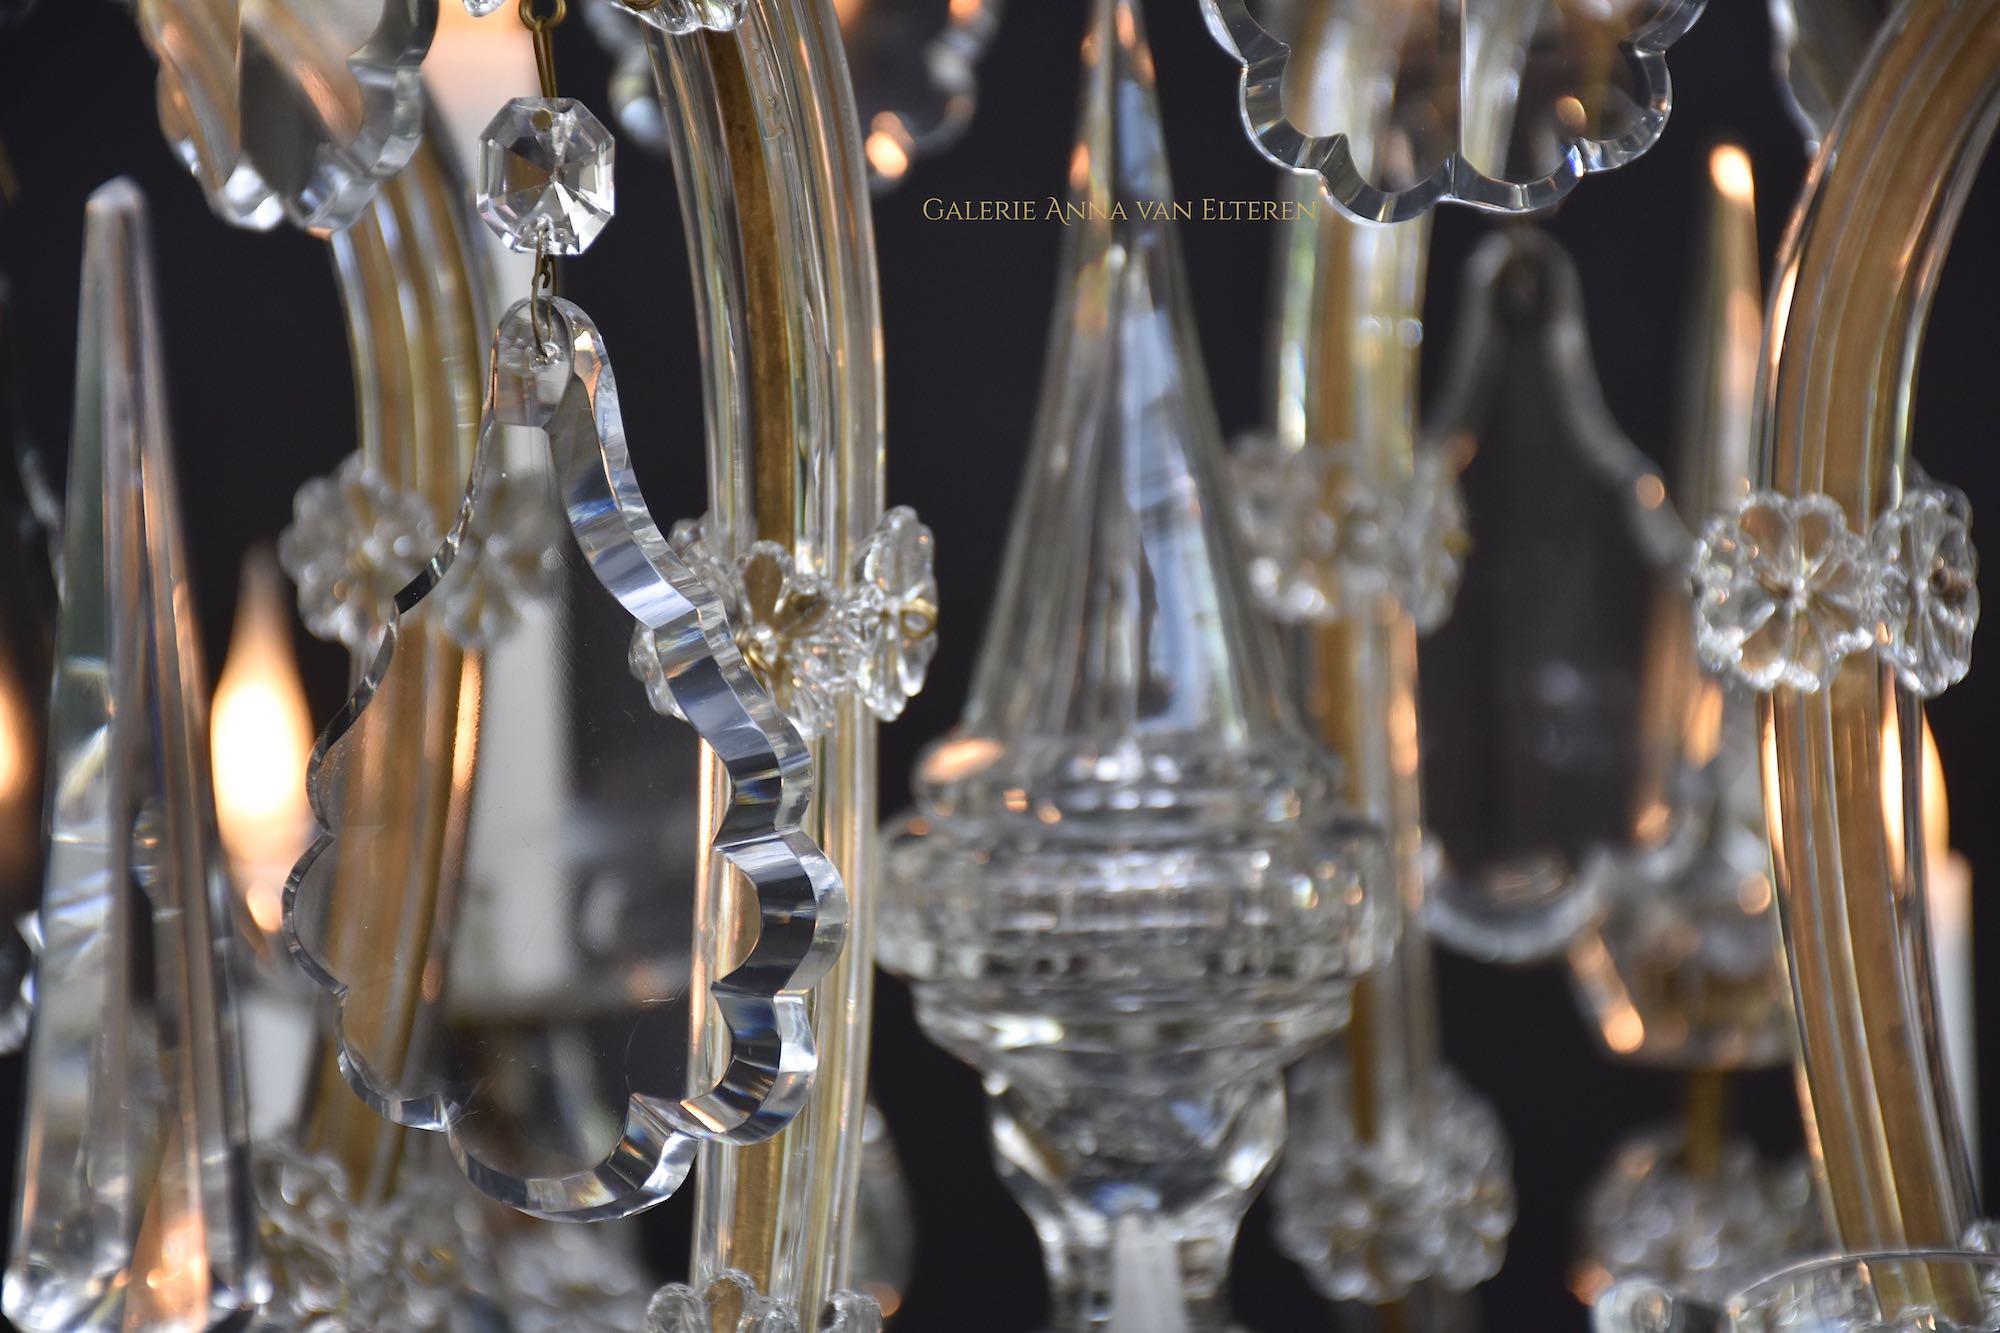 19th c. large crystal chandelier 'Maria Theresia' by Jos. Zahn & Co Vienna